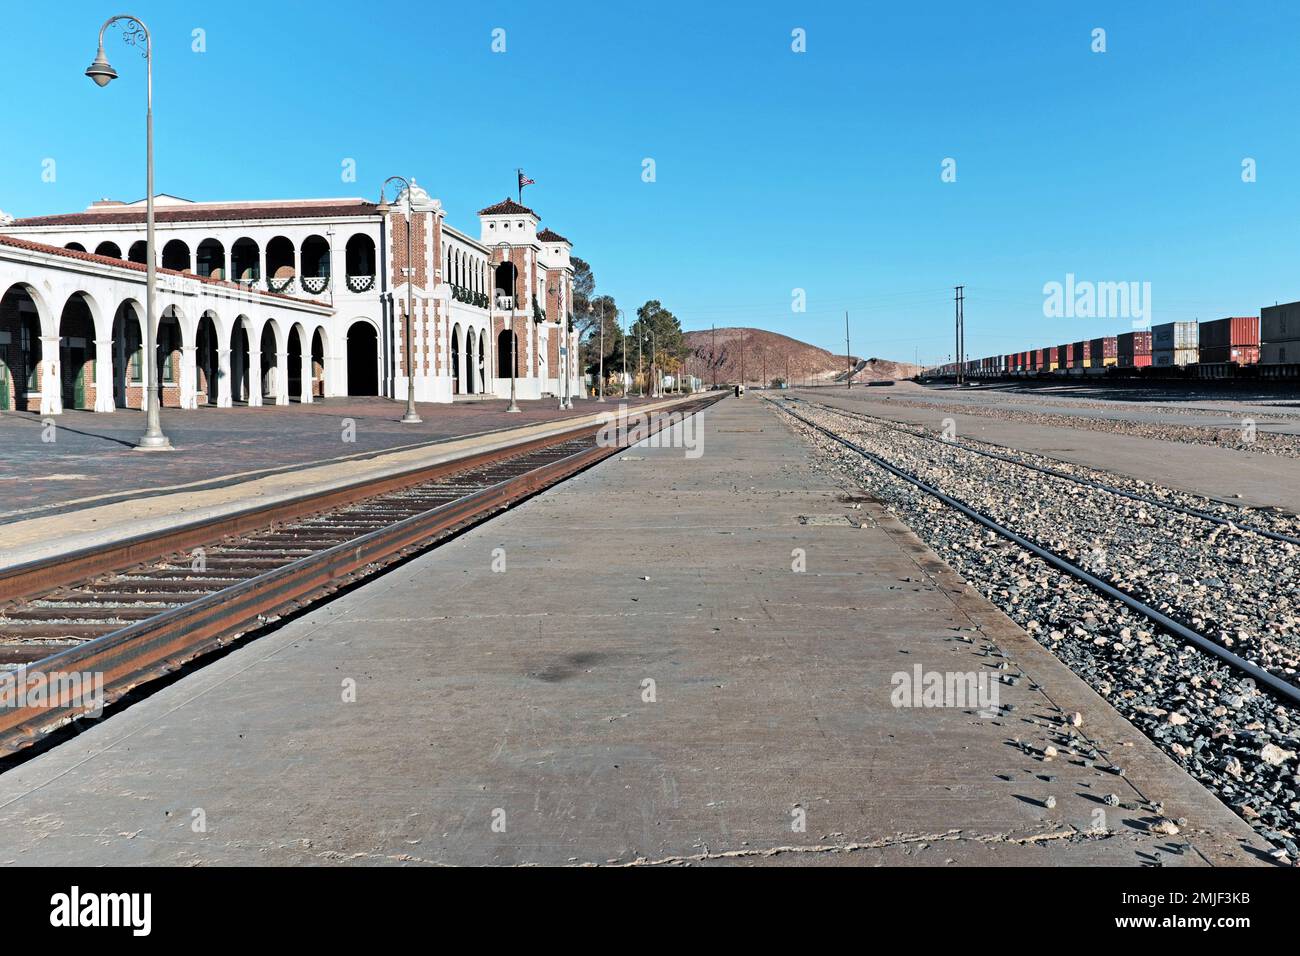 Casa de Desierto in Barstow, California is a railroad depot station, now used by Amtrak, in the Mojave Desert known for the Harvey Girls hospitality. Stock Photo